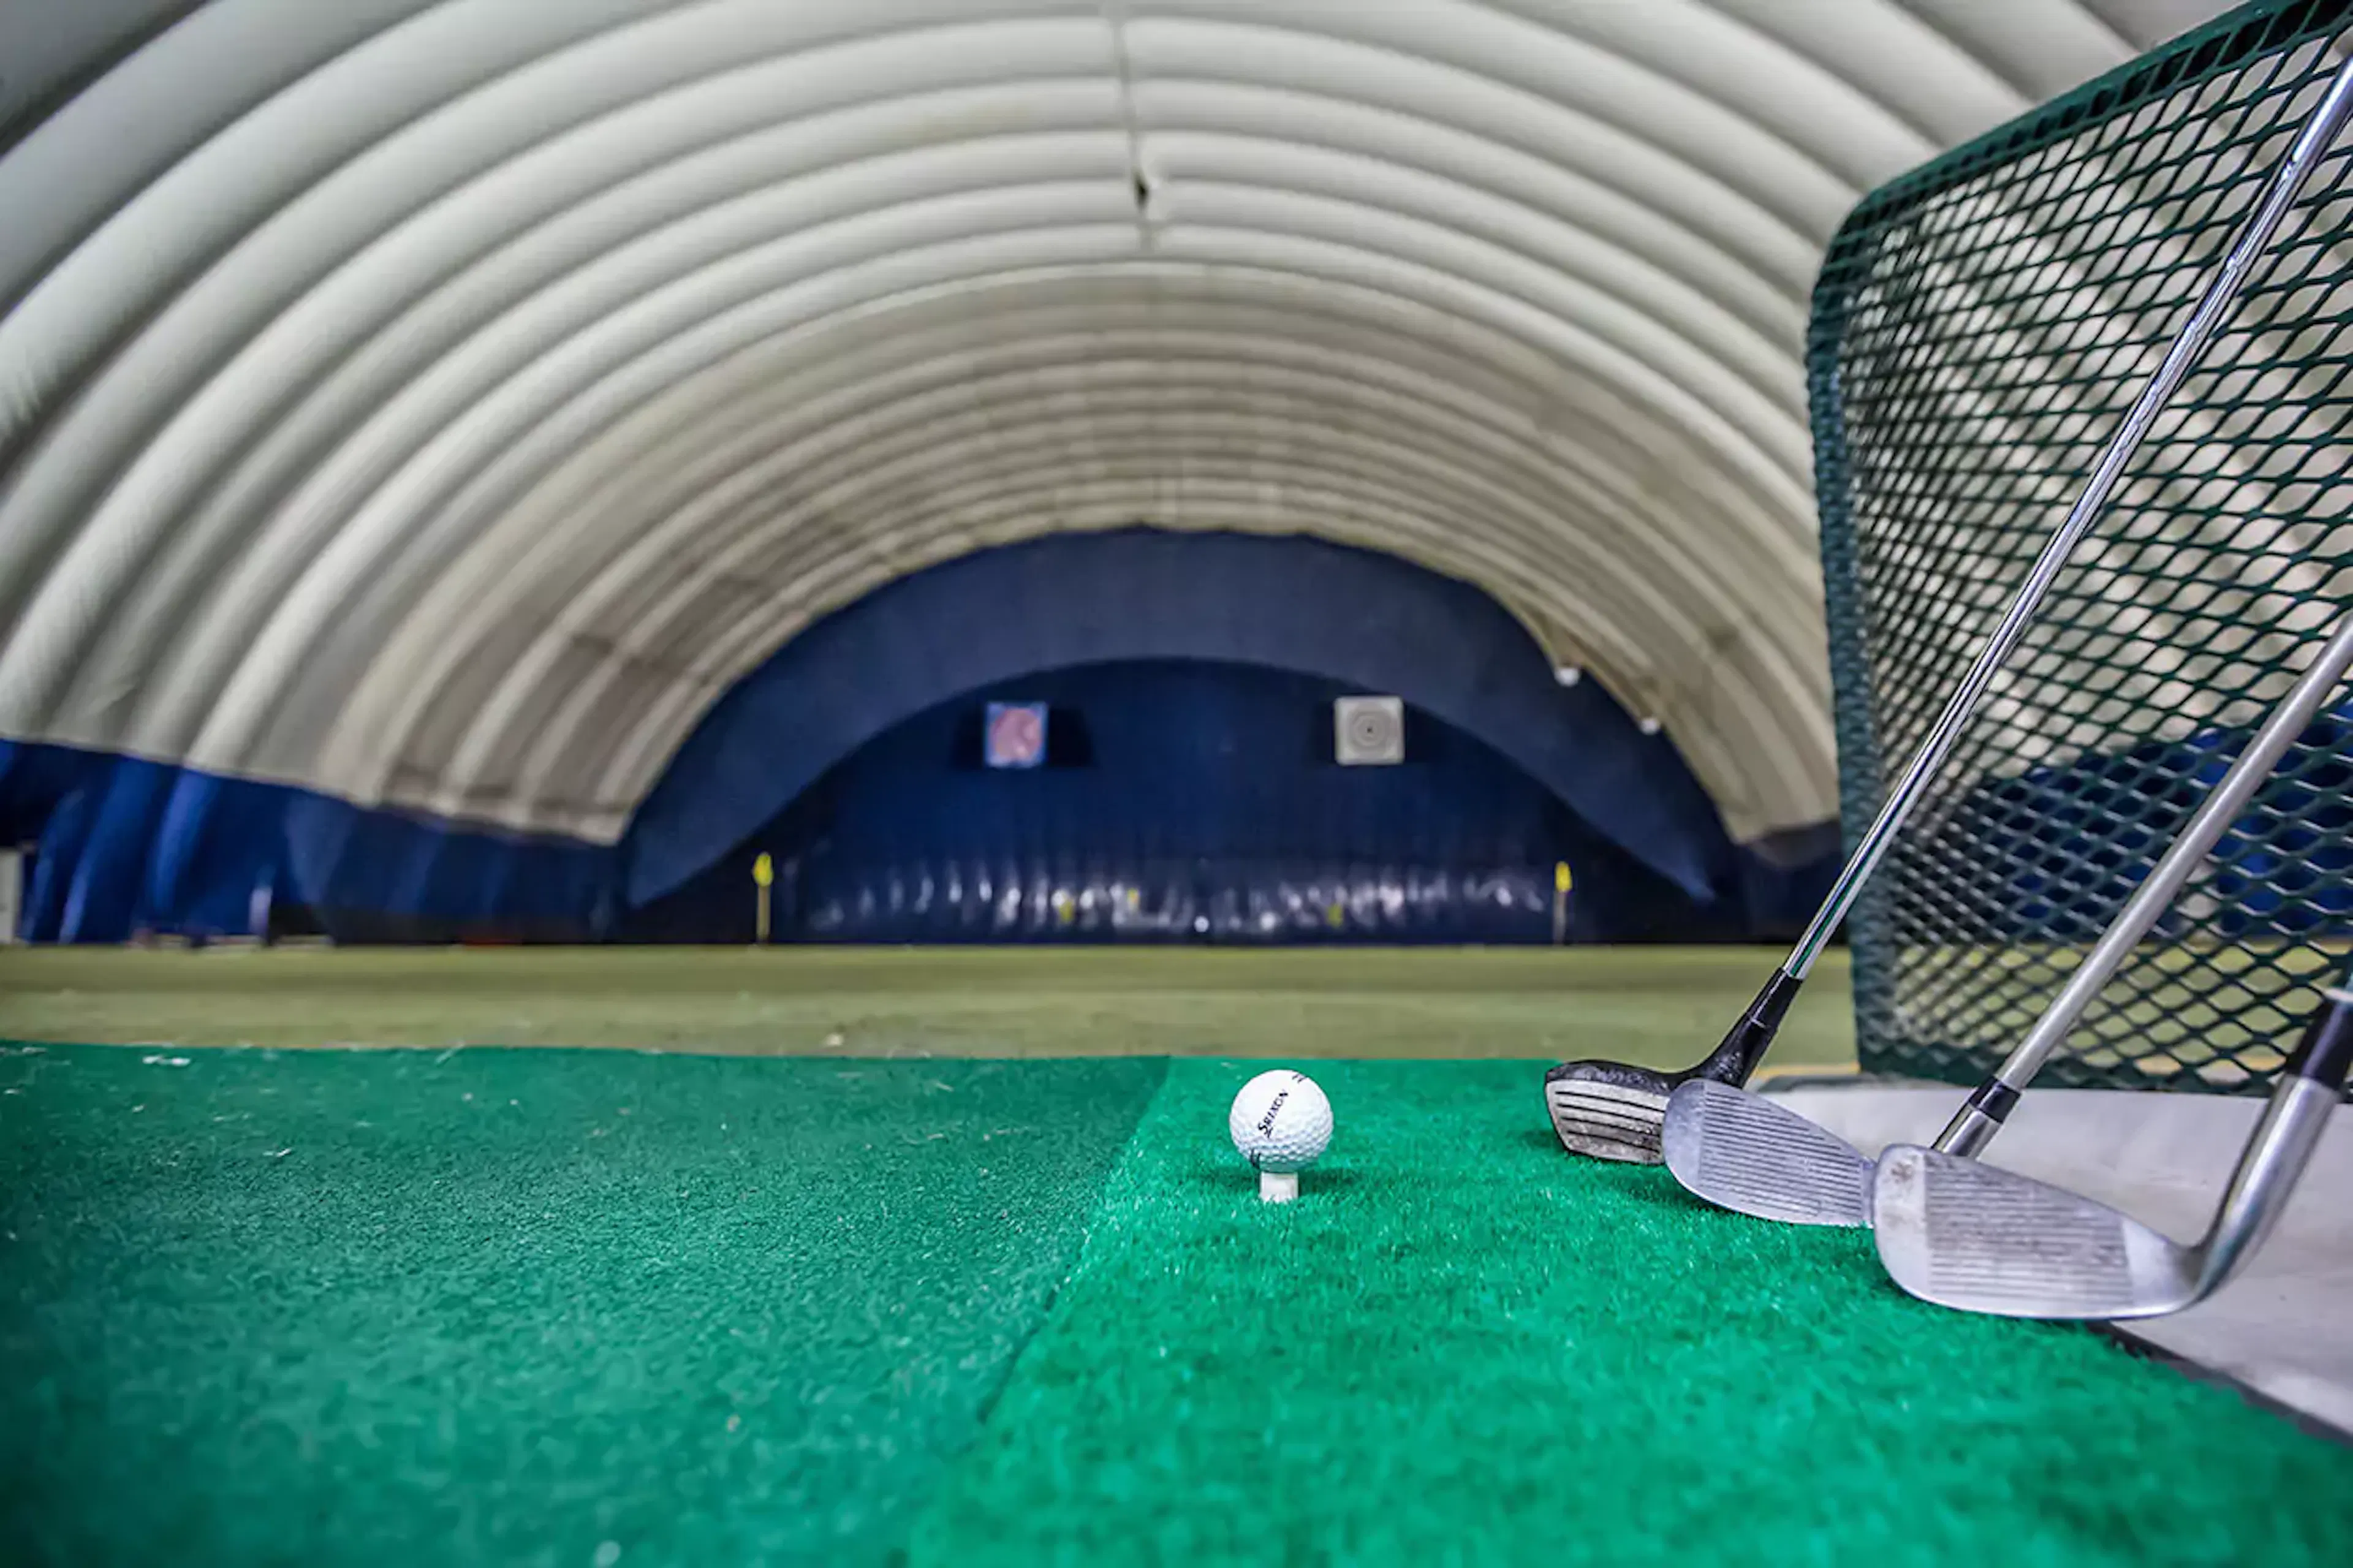 c.j. barrymore's golf dome